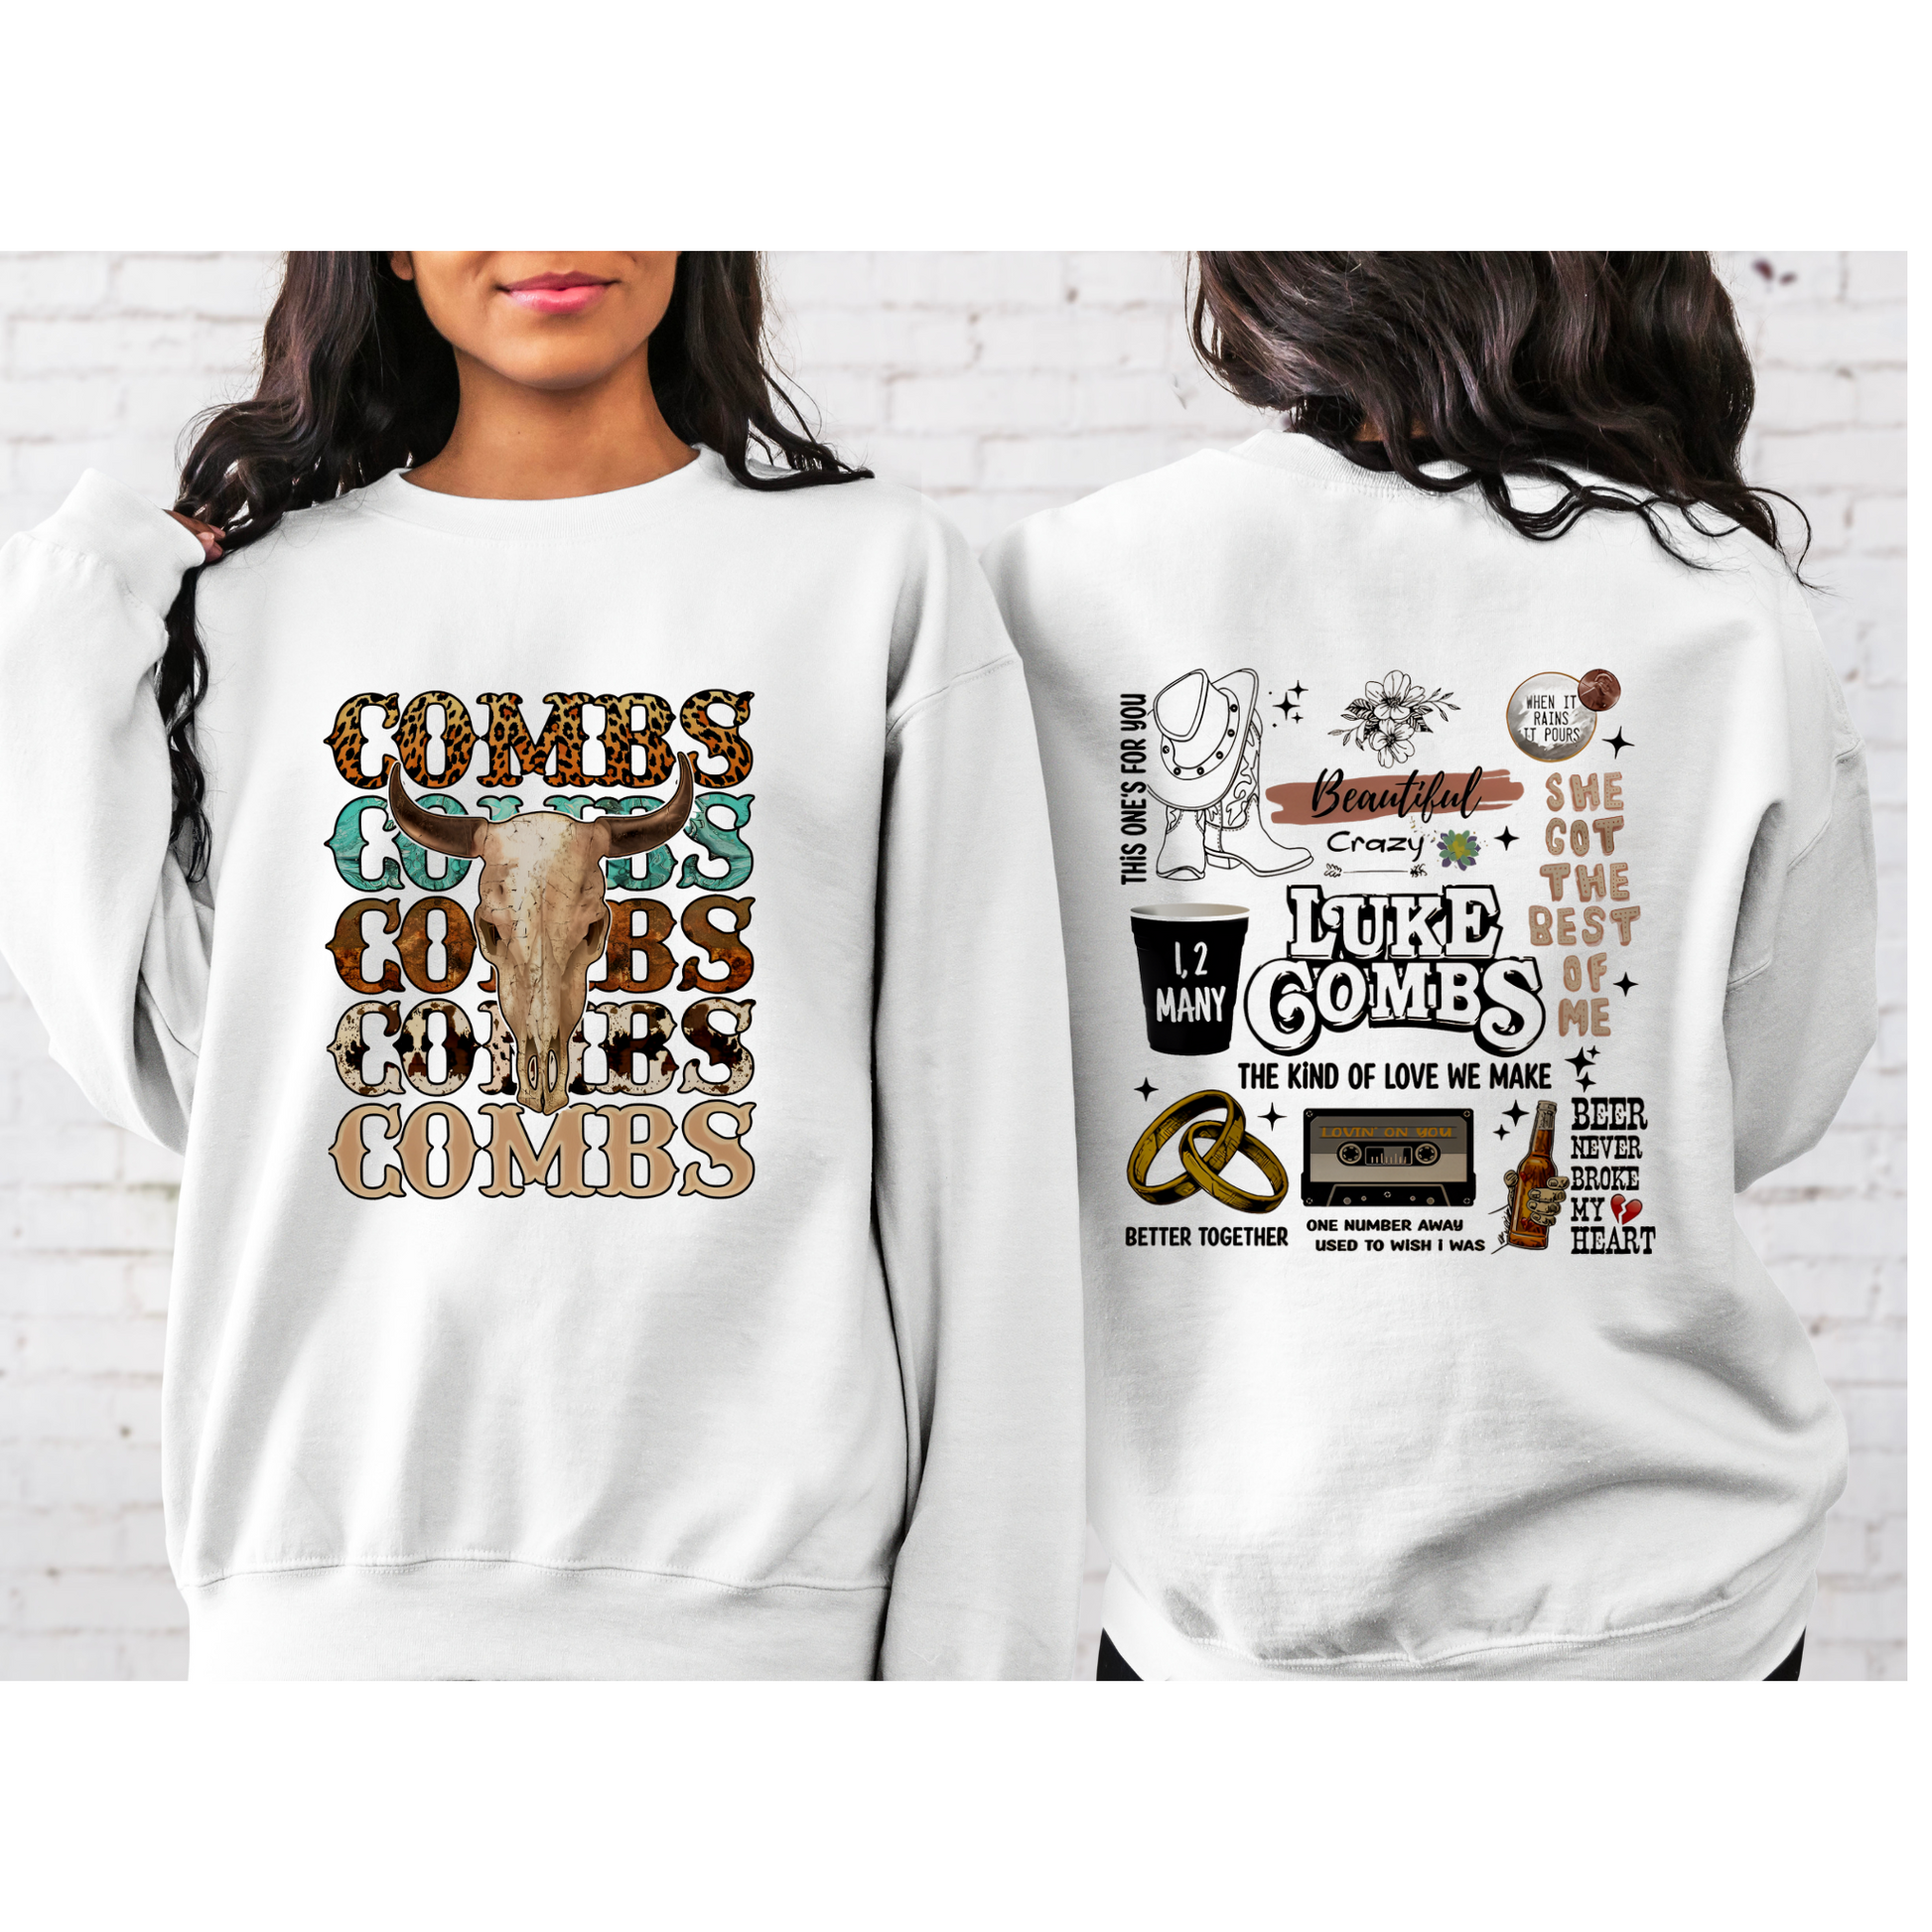 Luke Combs Full Front and Back Graphic Sweatshirt White